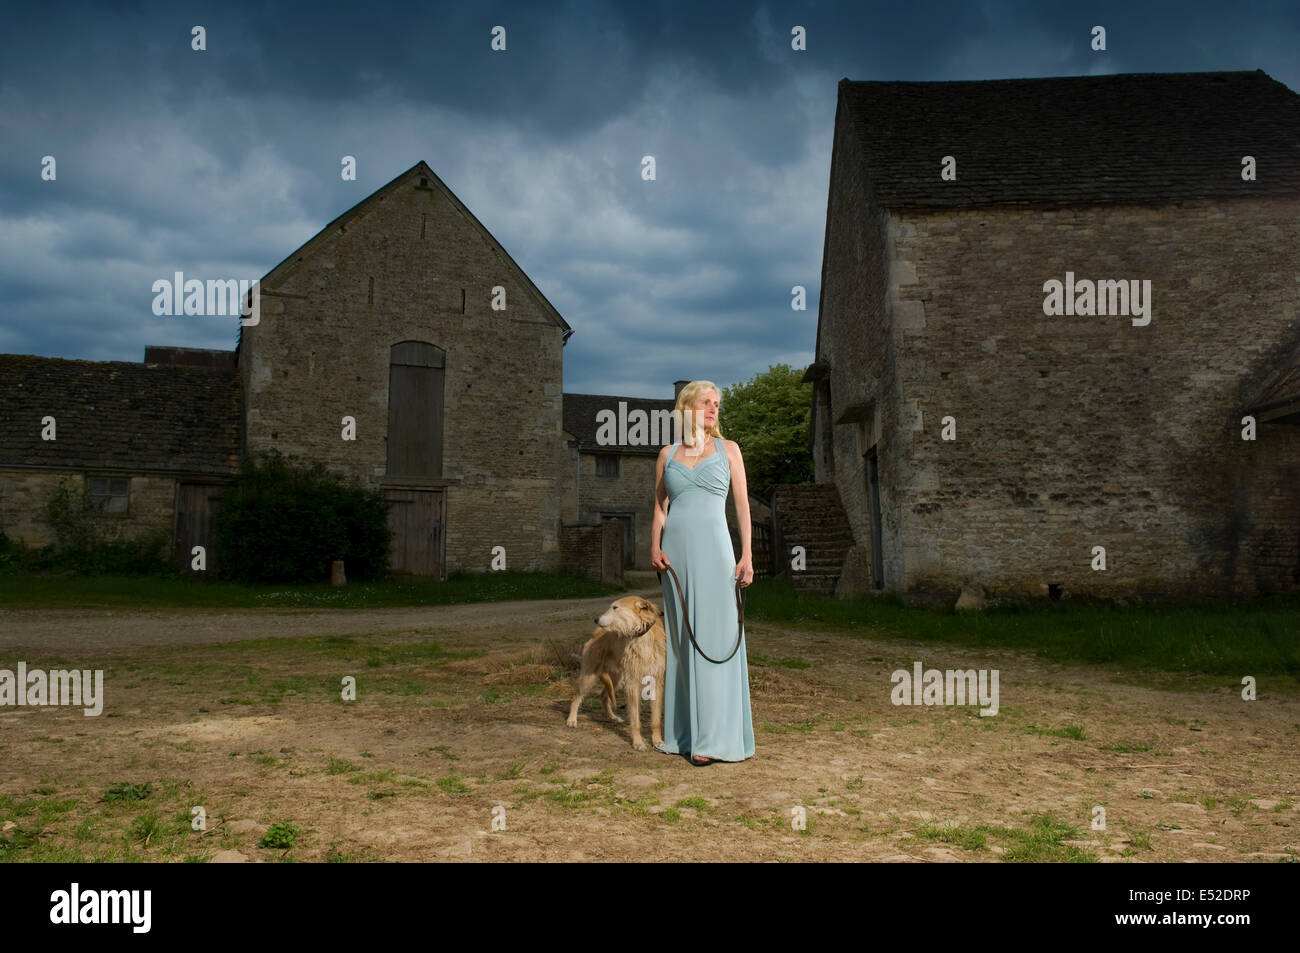 A woman with a lurcher dog in a farmyard, under a stormy sky. Stock Photo